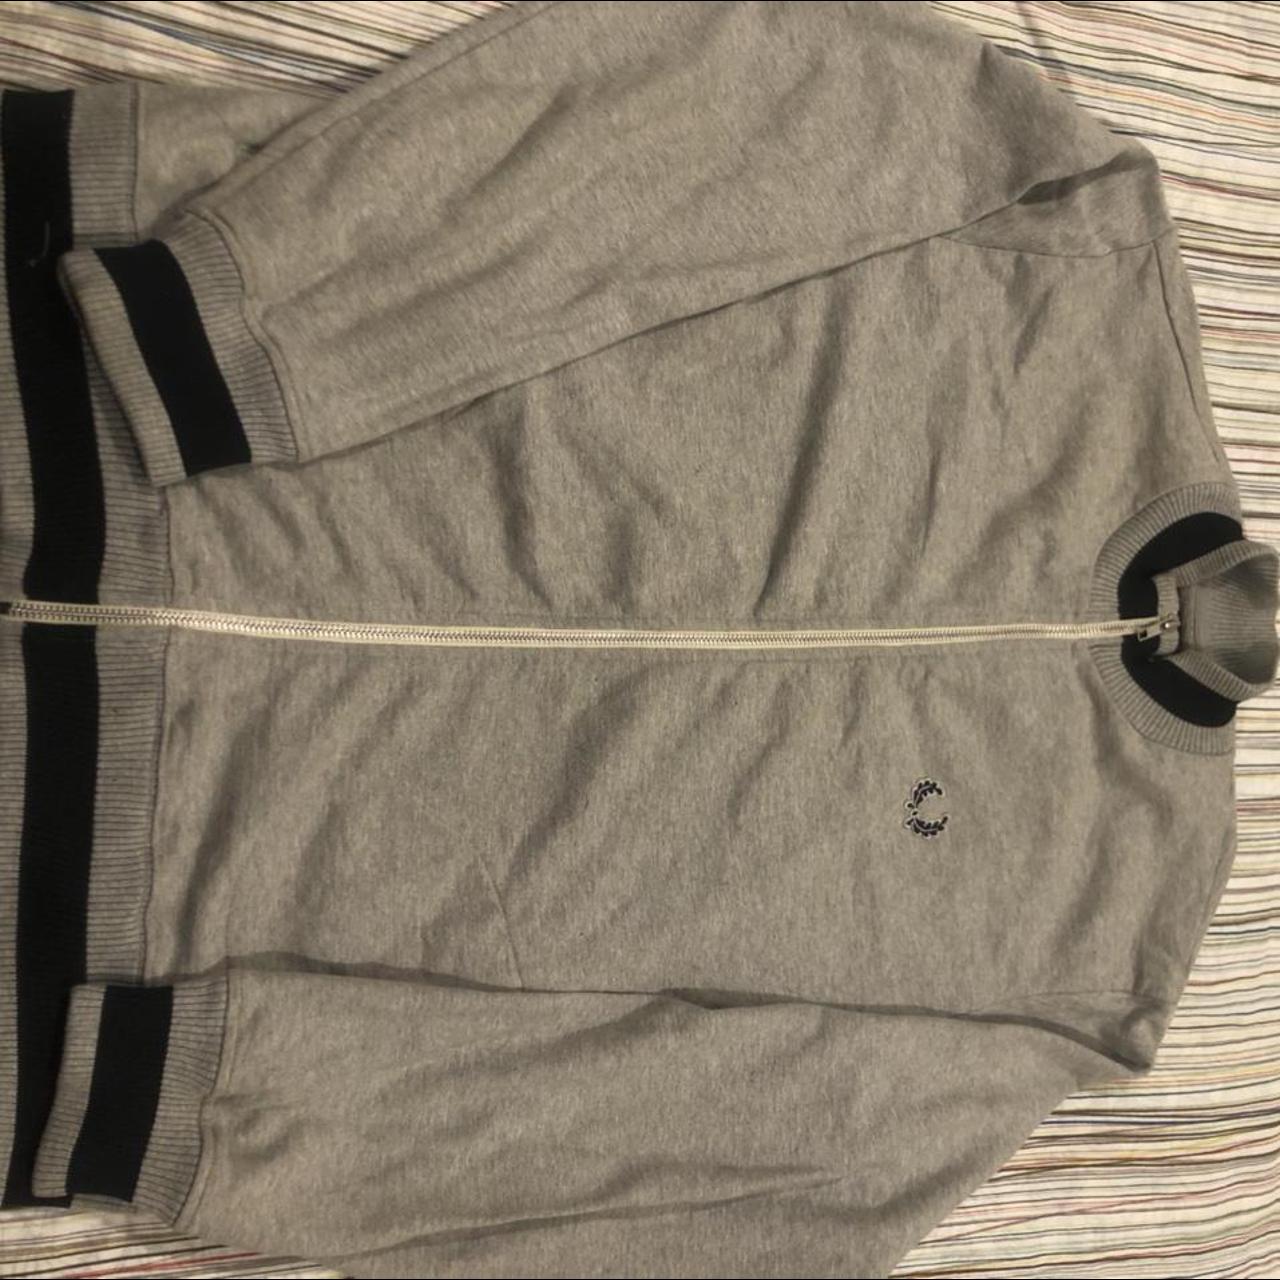 Product Image 1 - FRED PERRY TRACKTOP - GREY/BLACK